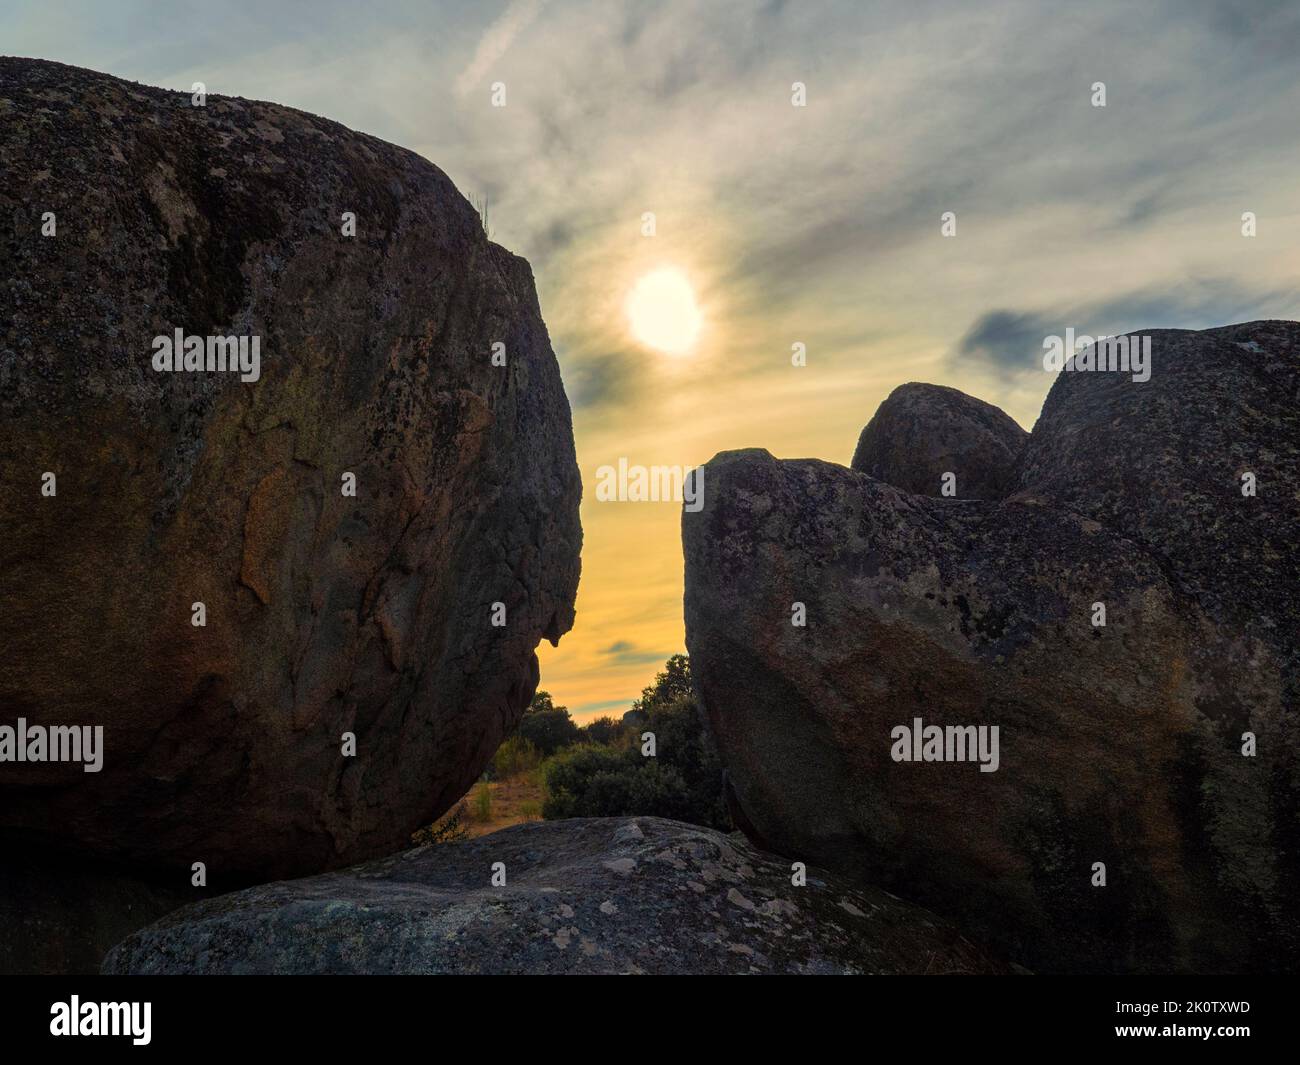 Sunset in the natural park of Los Barruecos, in the municipality of Malpartida. Stock Photo